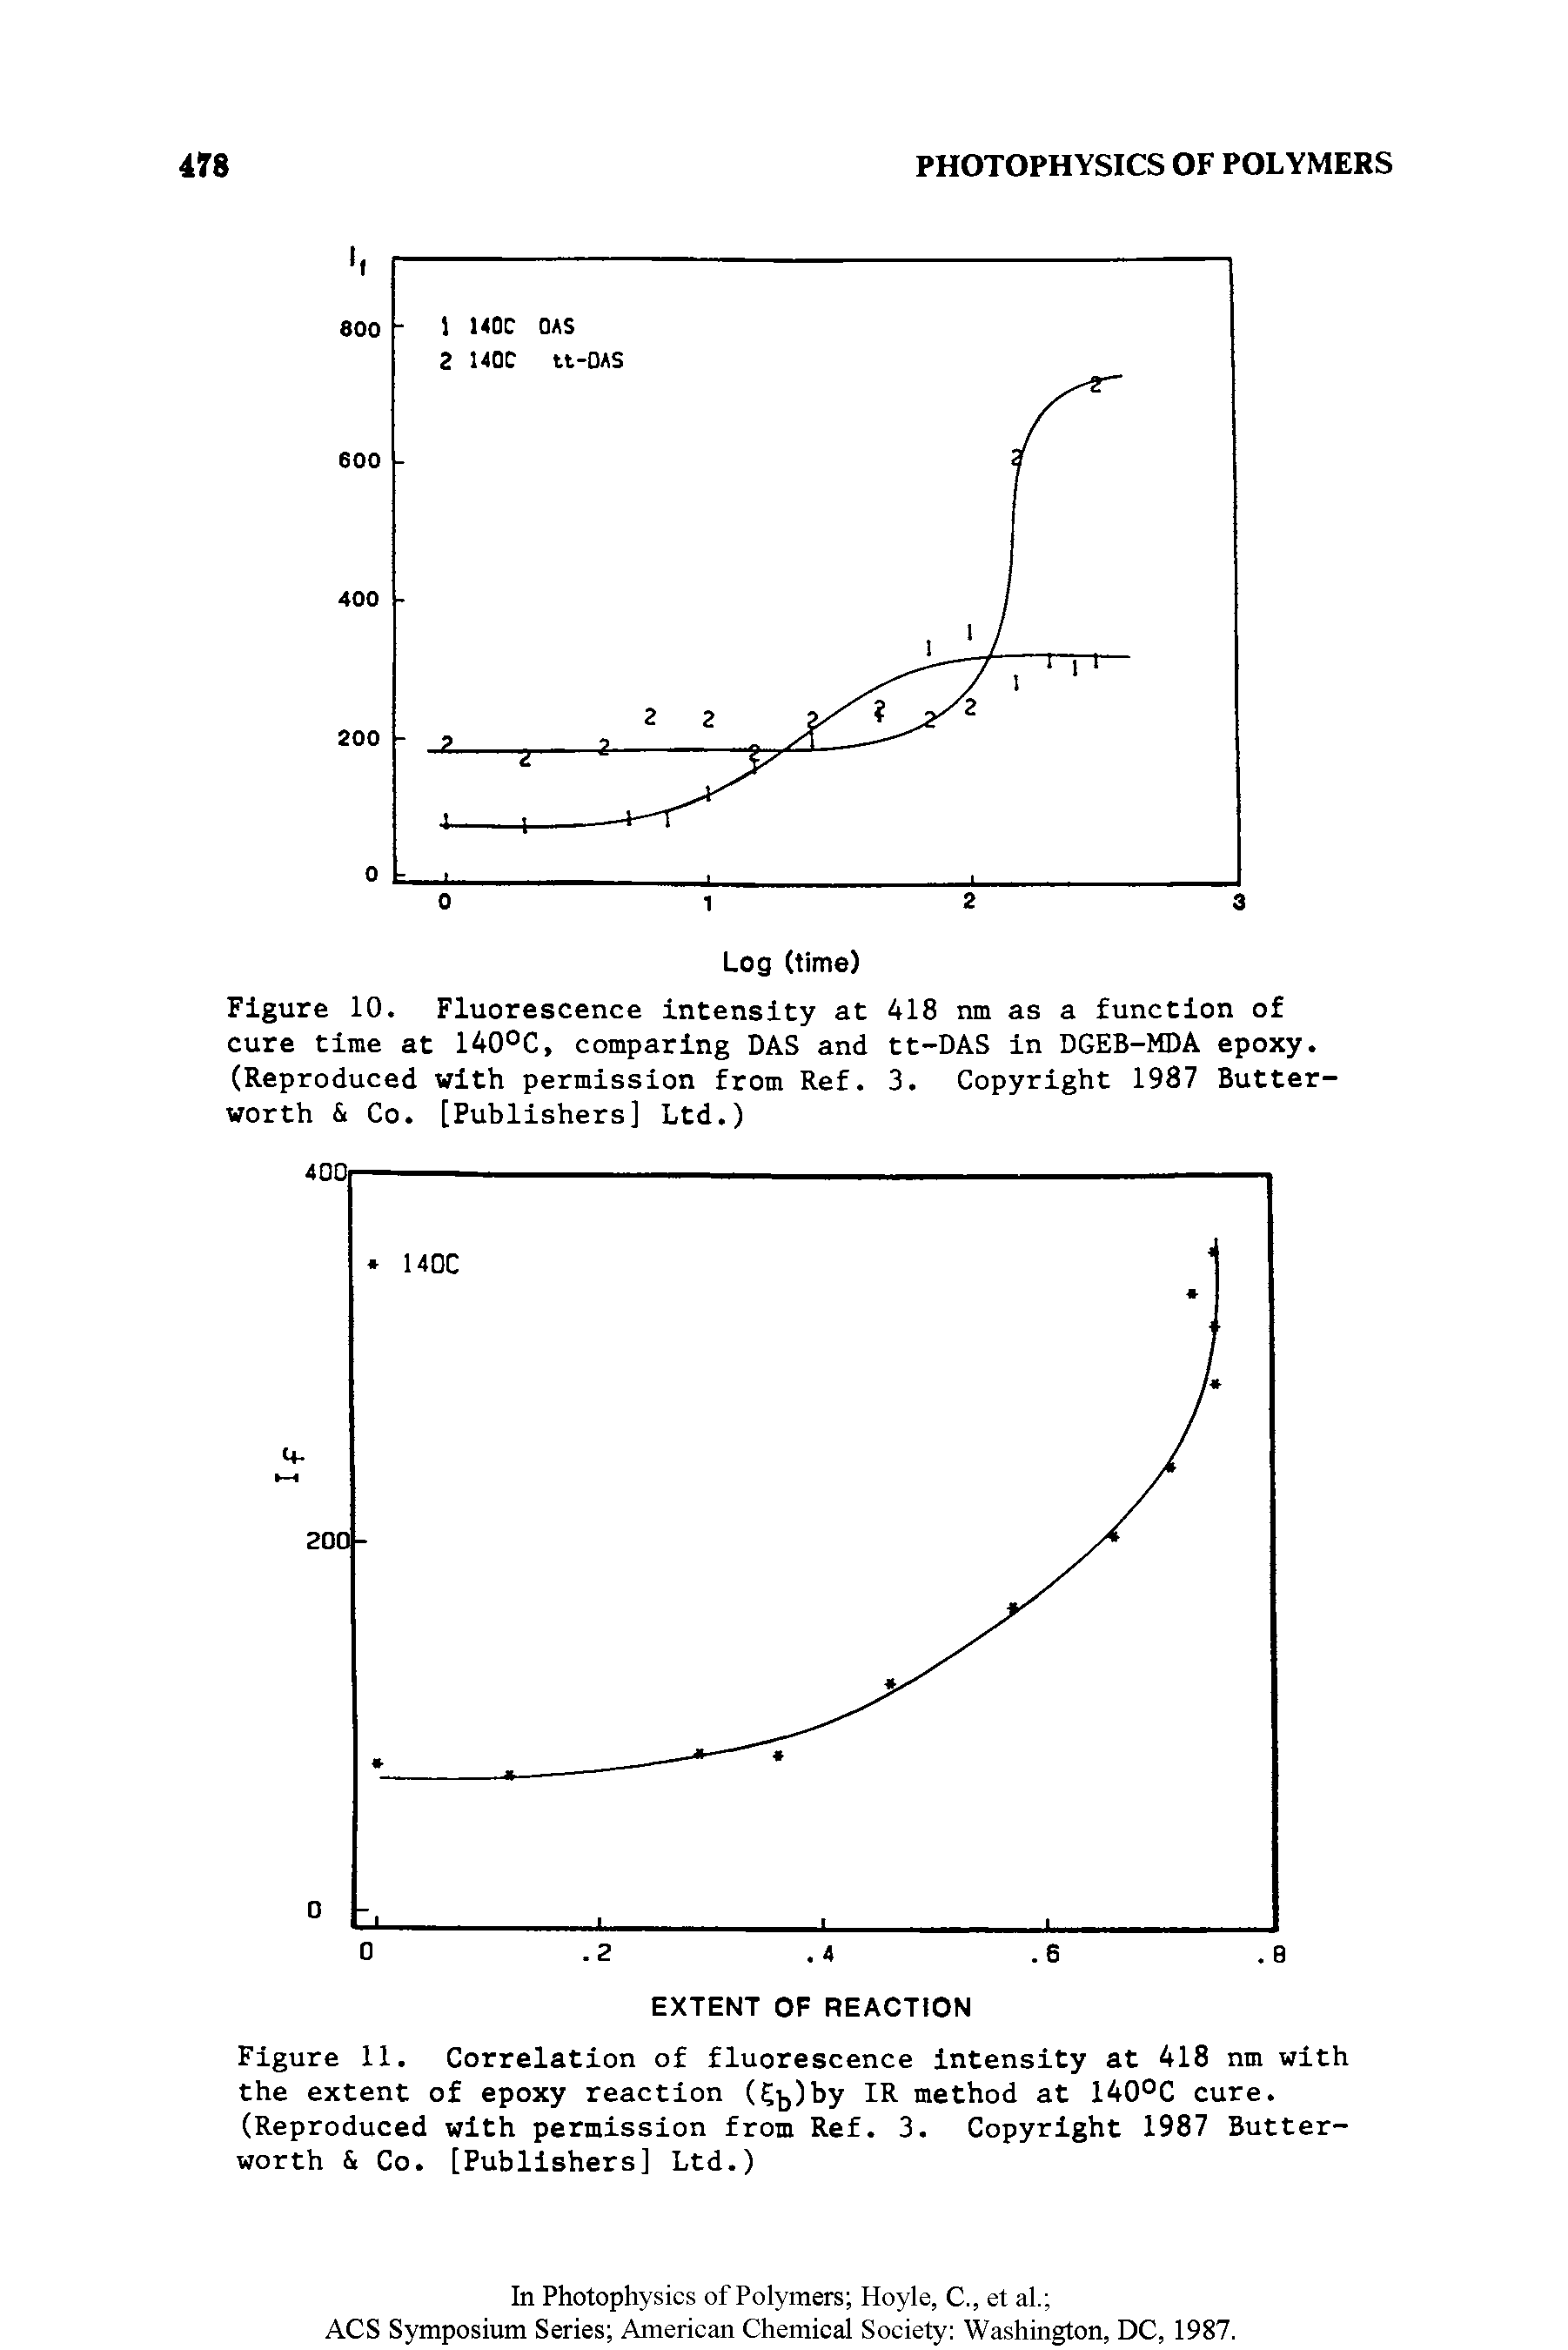 Figure 11. Correlation of fluorescence Intensity at 418 nm with the extent of epoxy reaction (5i,)by IR method at 140°C cure. (Reproduced with permission from Ref. 3. Copyright 1987 Butter-worth Co. [Publishers] Ltd.)...